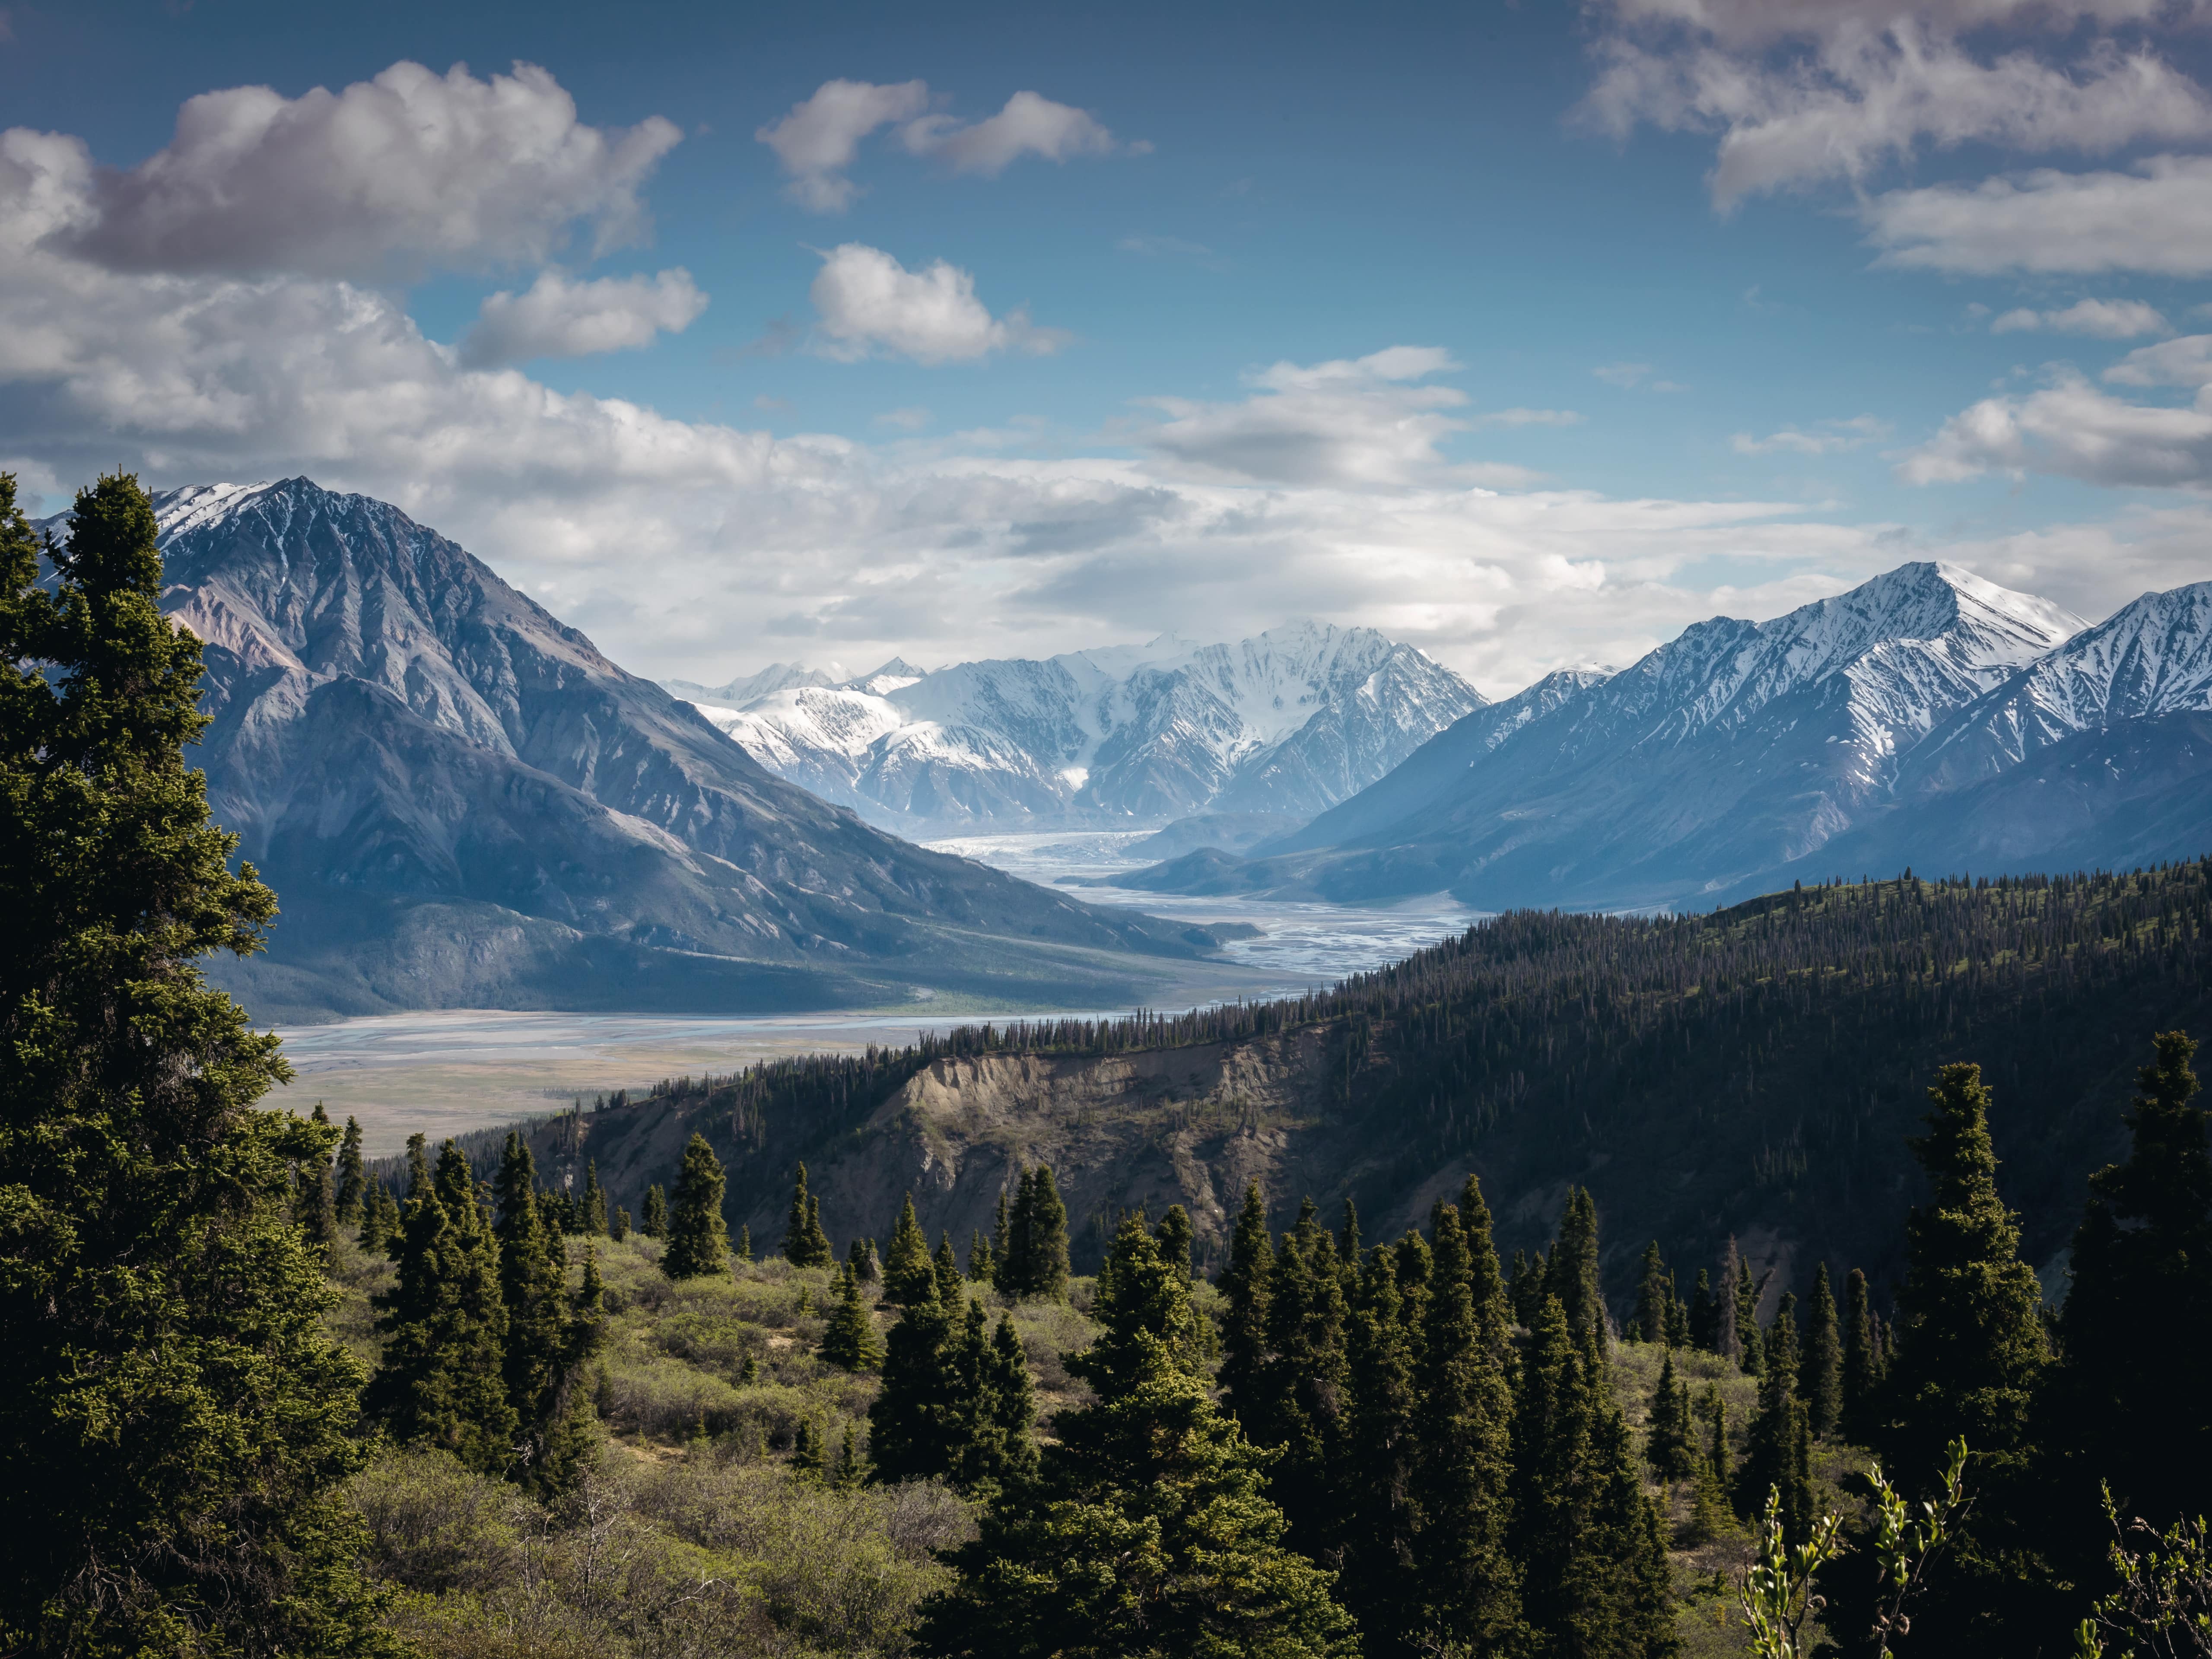 Mountains and forest in Kluane National Park in Canada